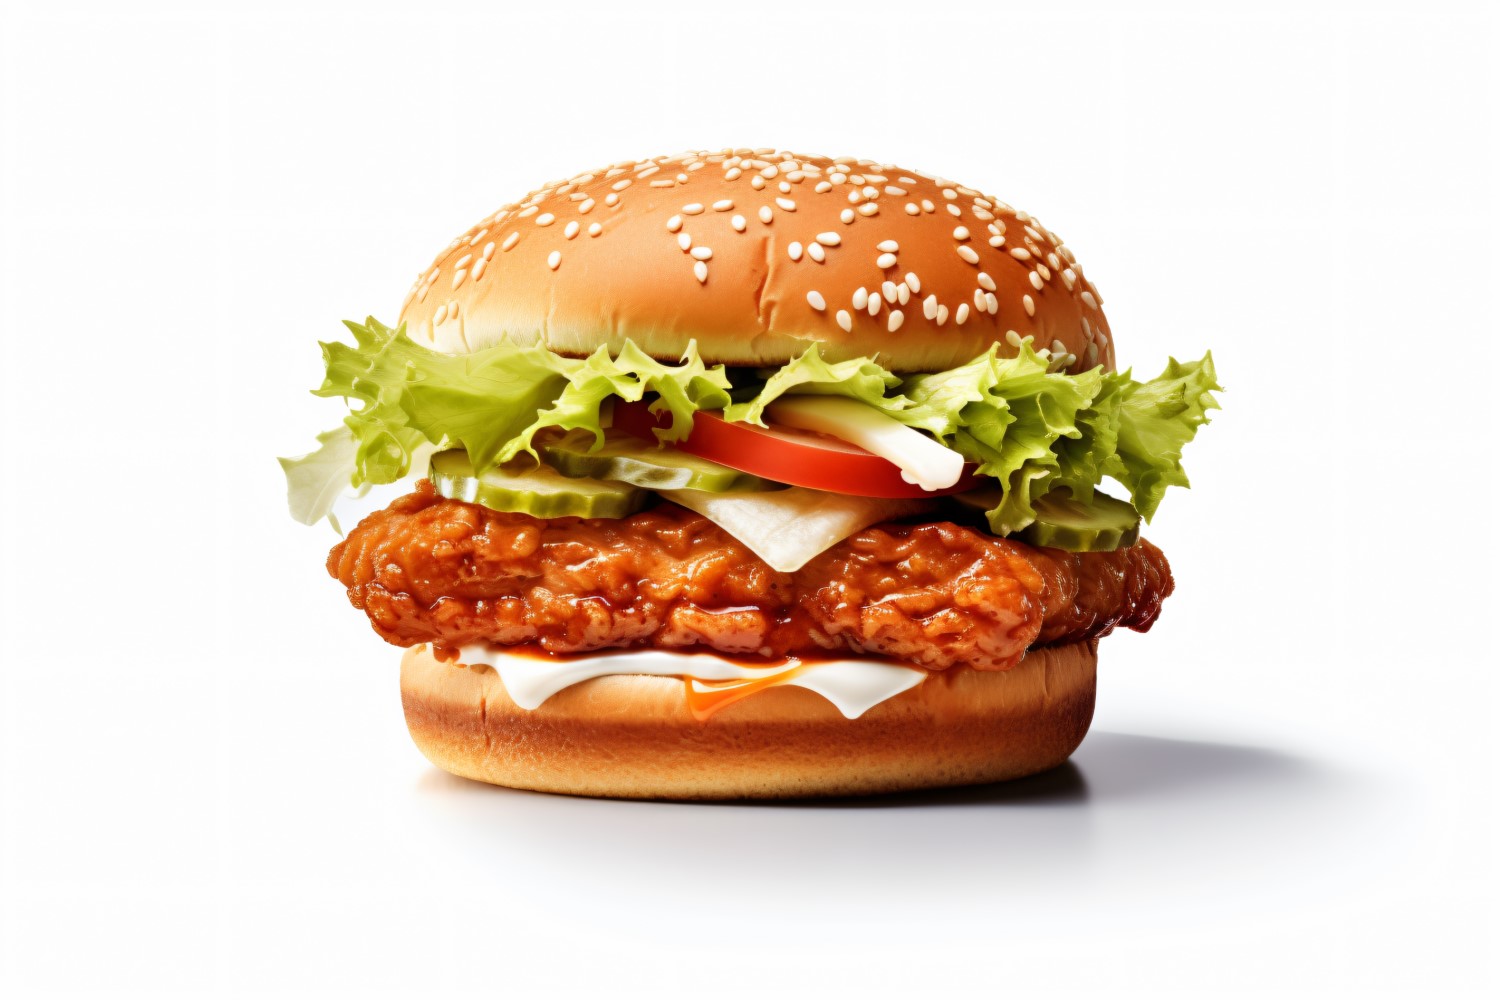 Crunchy Chicken and Fish Burger, on white background 34